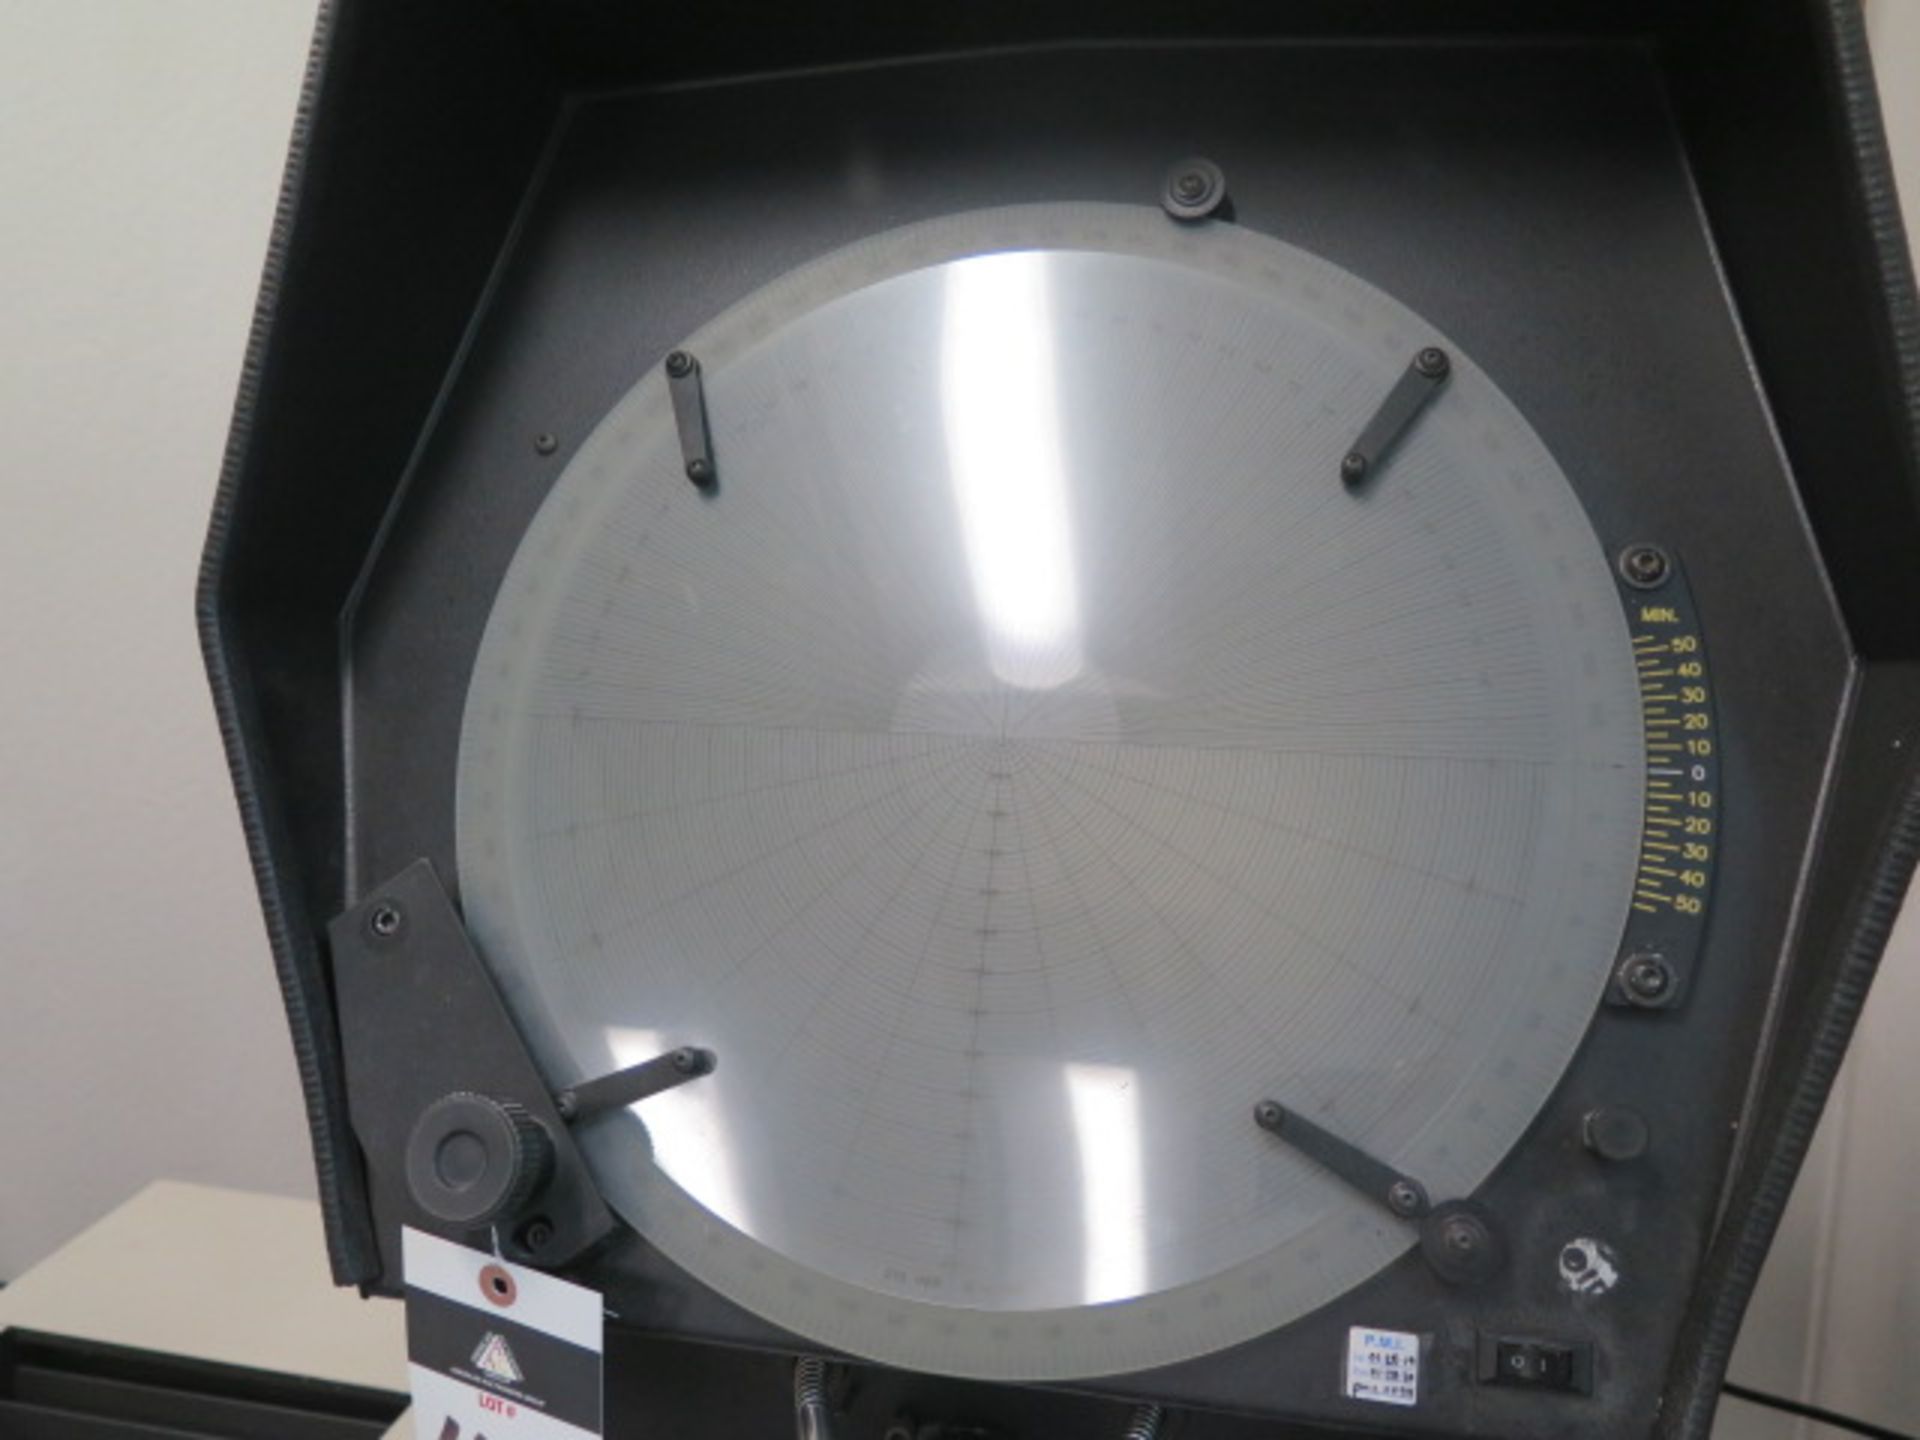 Suburban “Master View” mdl. MV14D 14” Optical Comparator s/n 3018-0903F w/ Fagor Programmable DRO, - Image 3 of 7